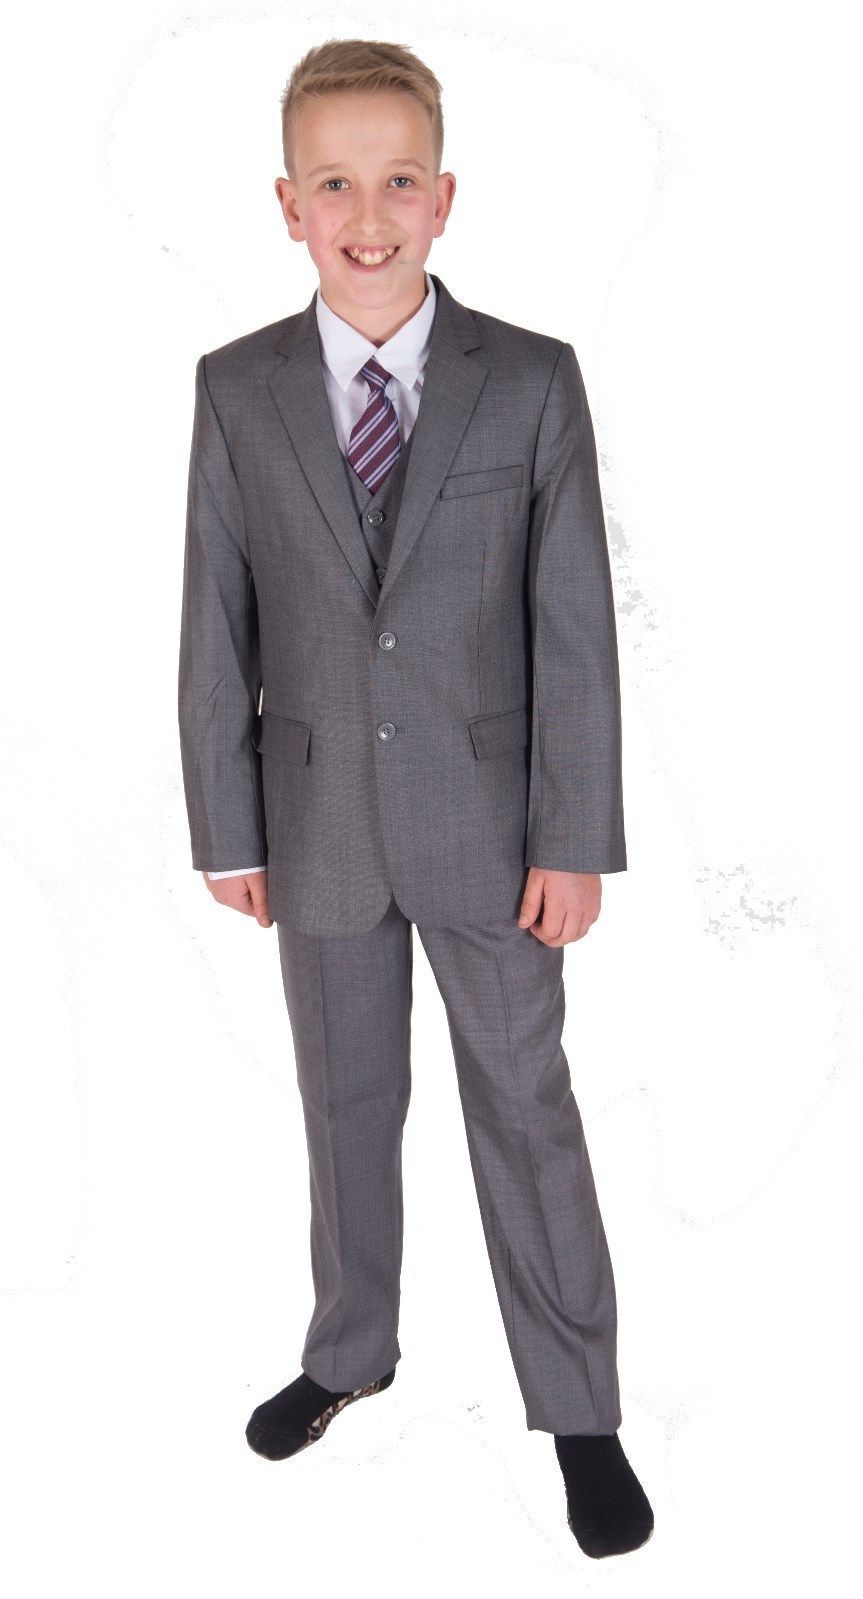 Boys Grey Suits 5 Piece Wedding Suit Page Boy Party Prom Suit 2-12 Years 